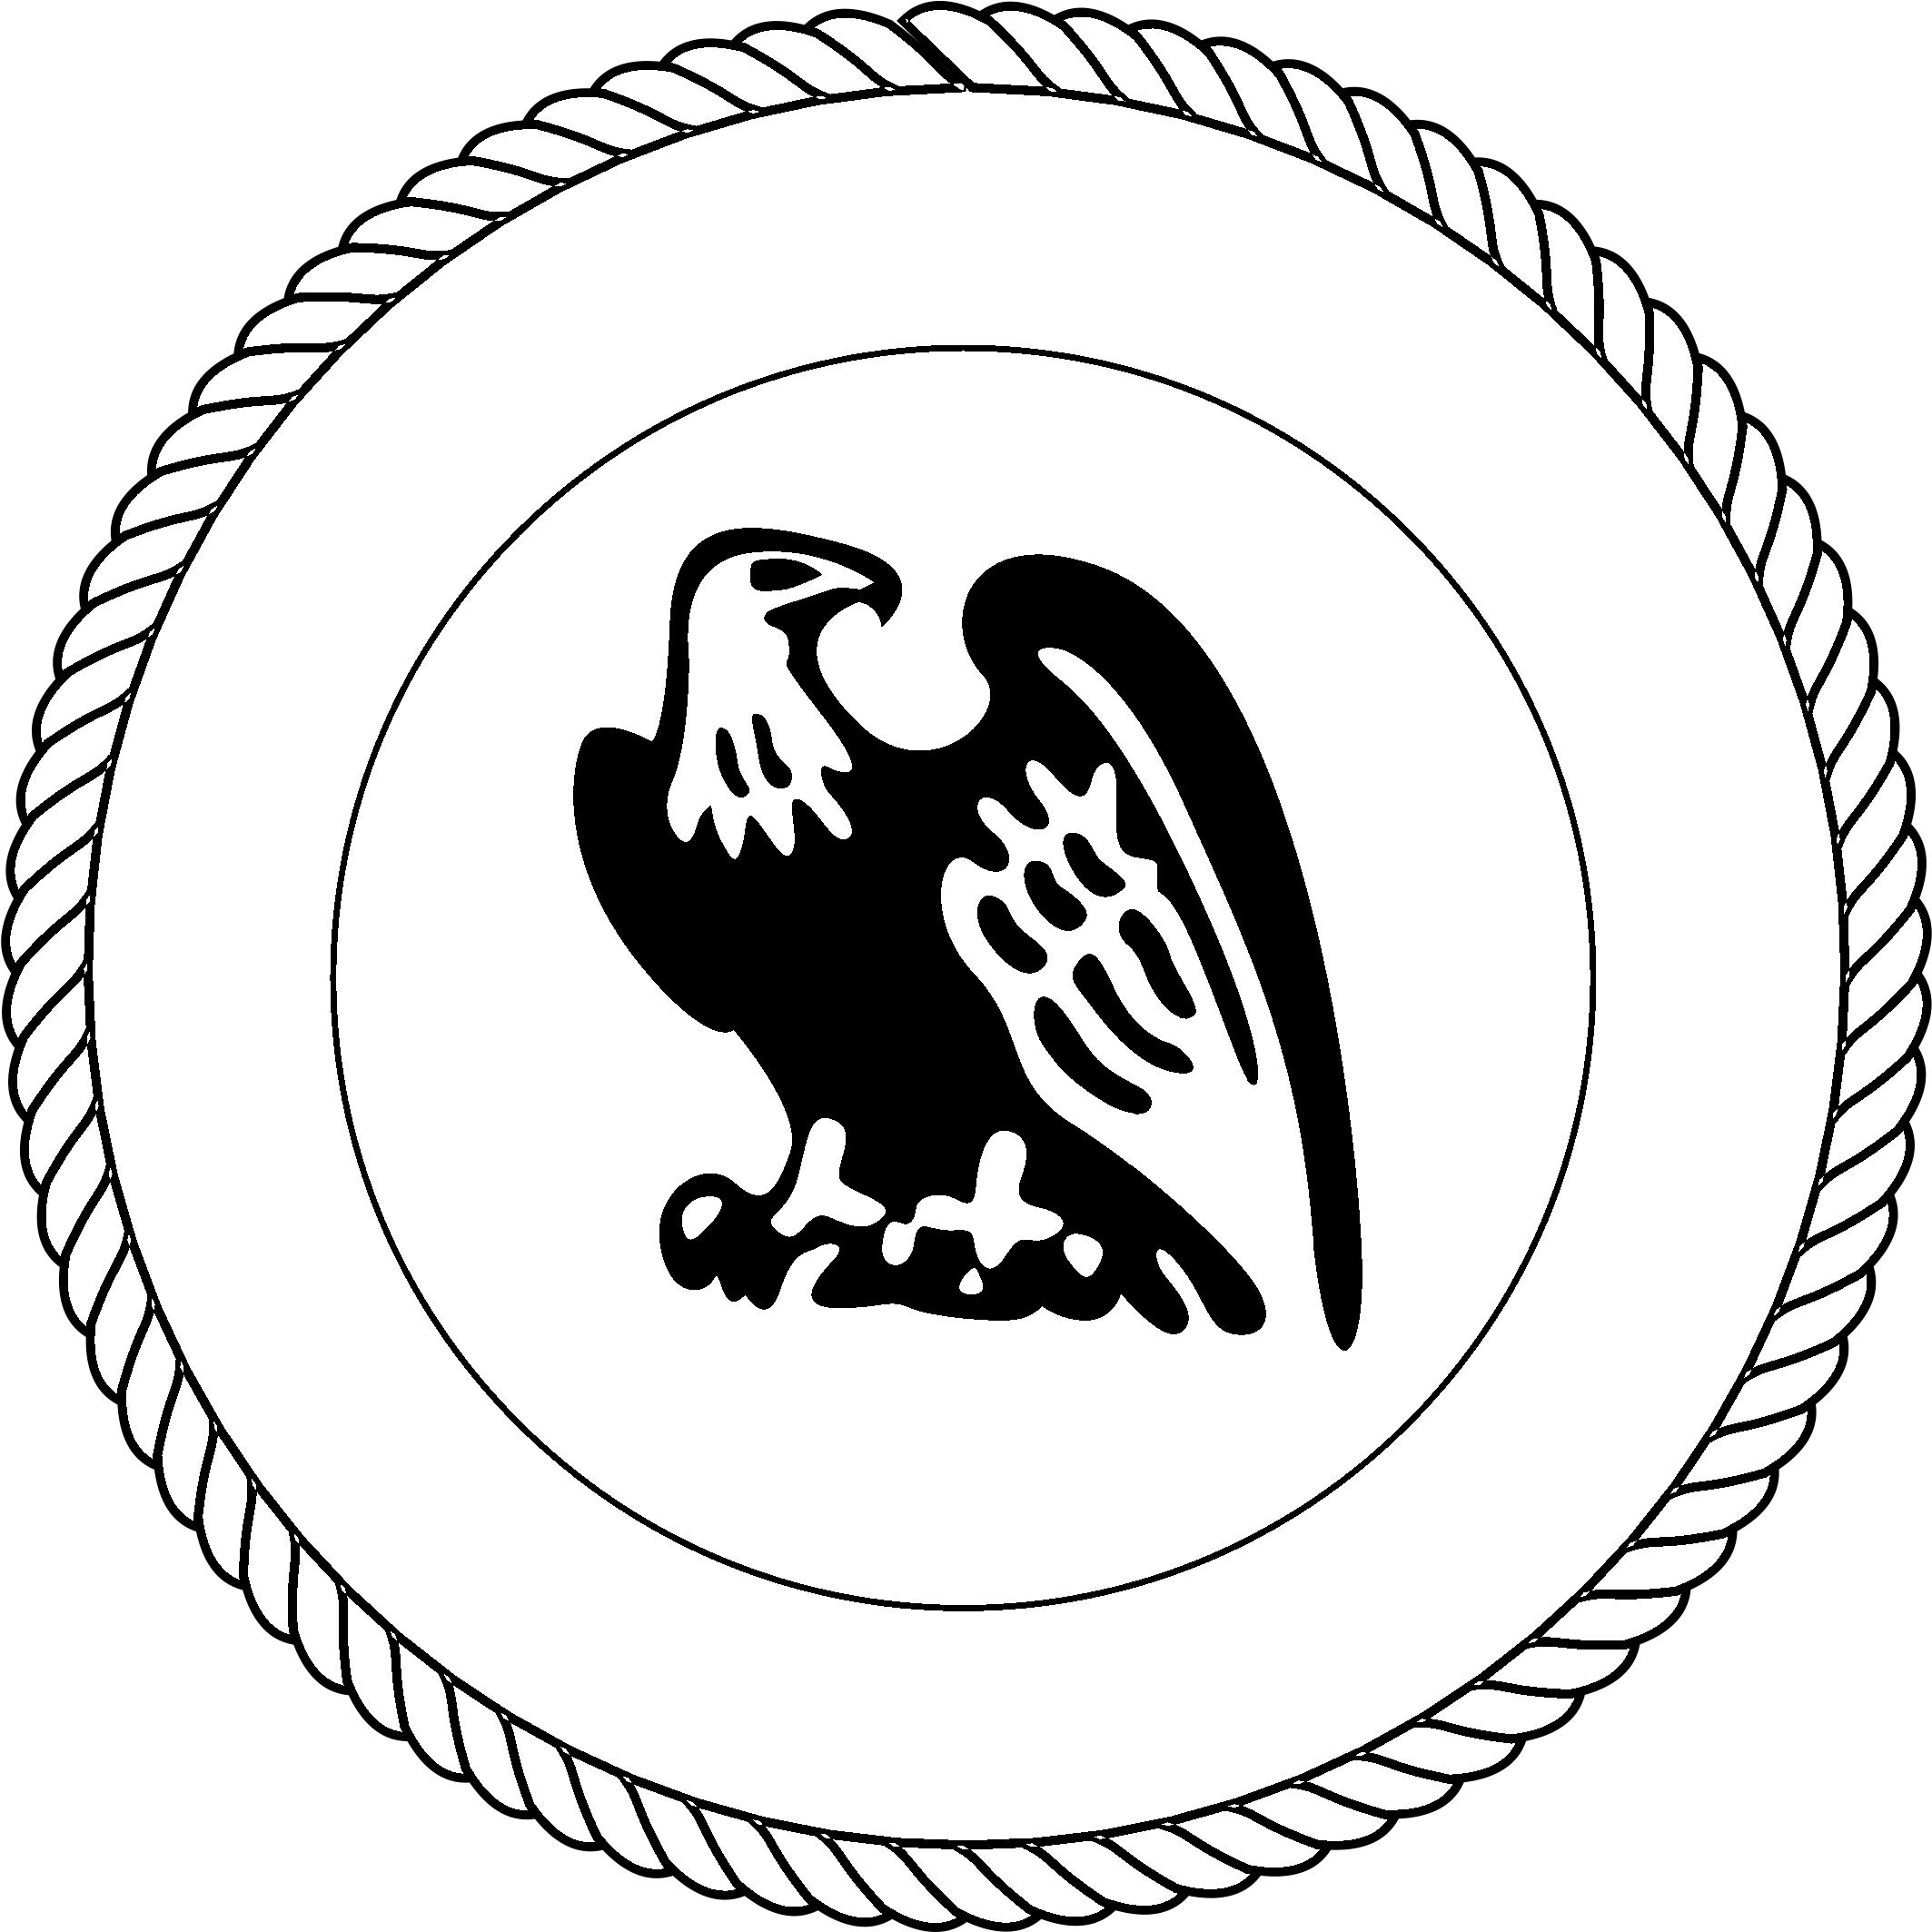 American Bank Of Albania 01 Logo Black And White - Simple Tattoos Designs Eagle (2400x2400)